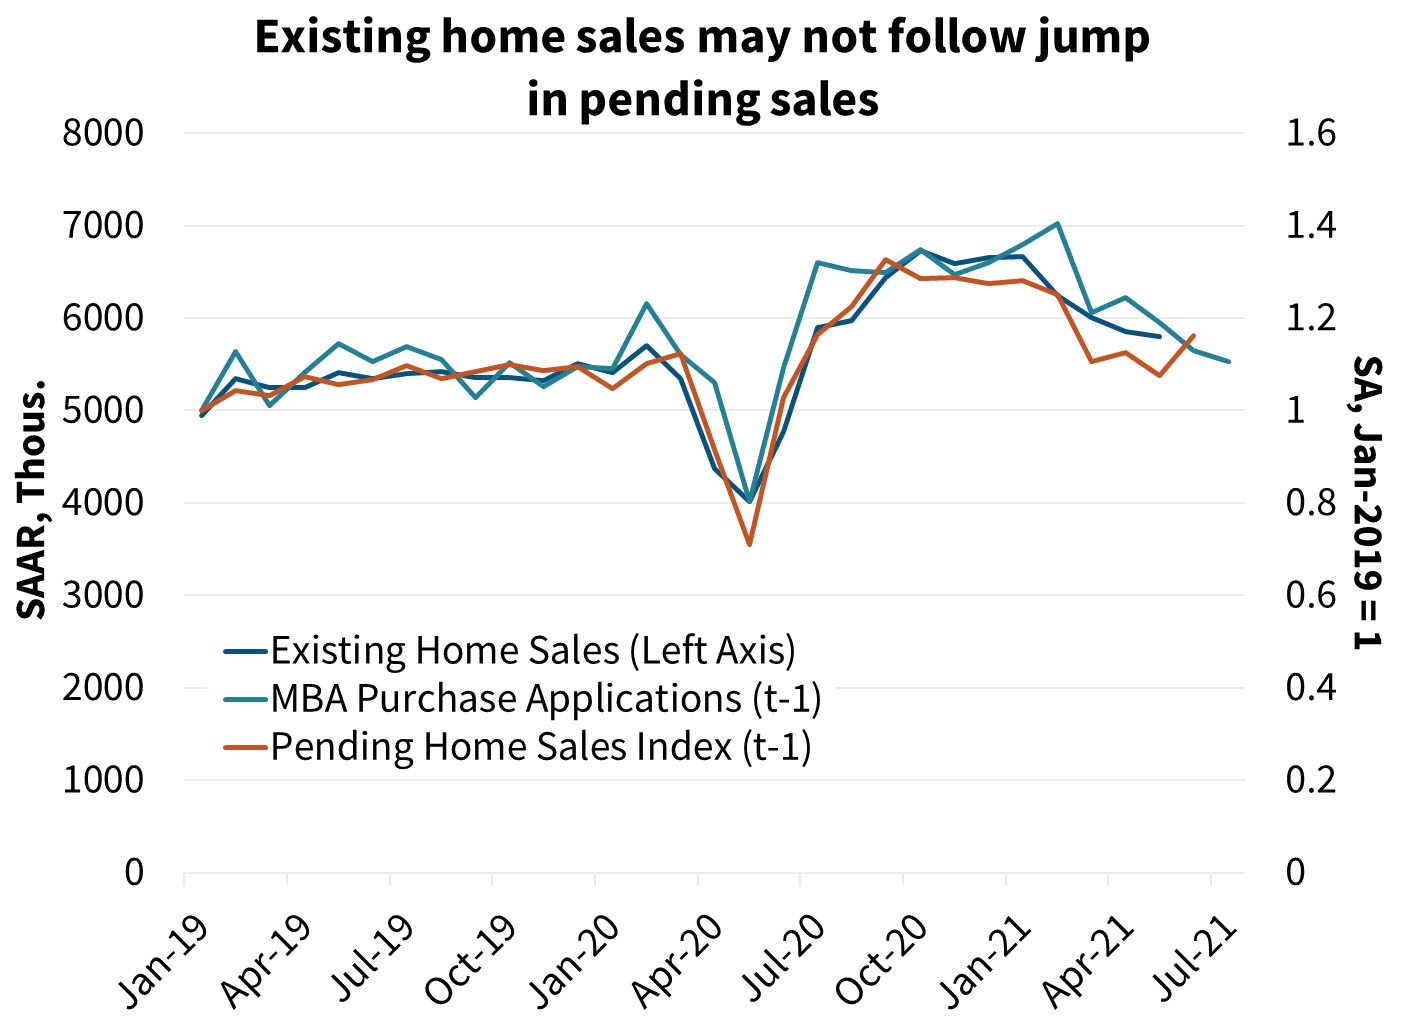  Existing home sales may not follow jump in pending sales 